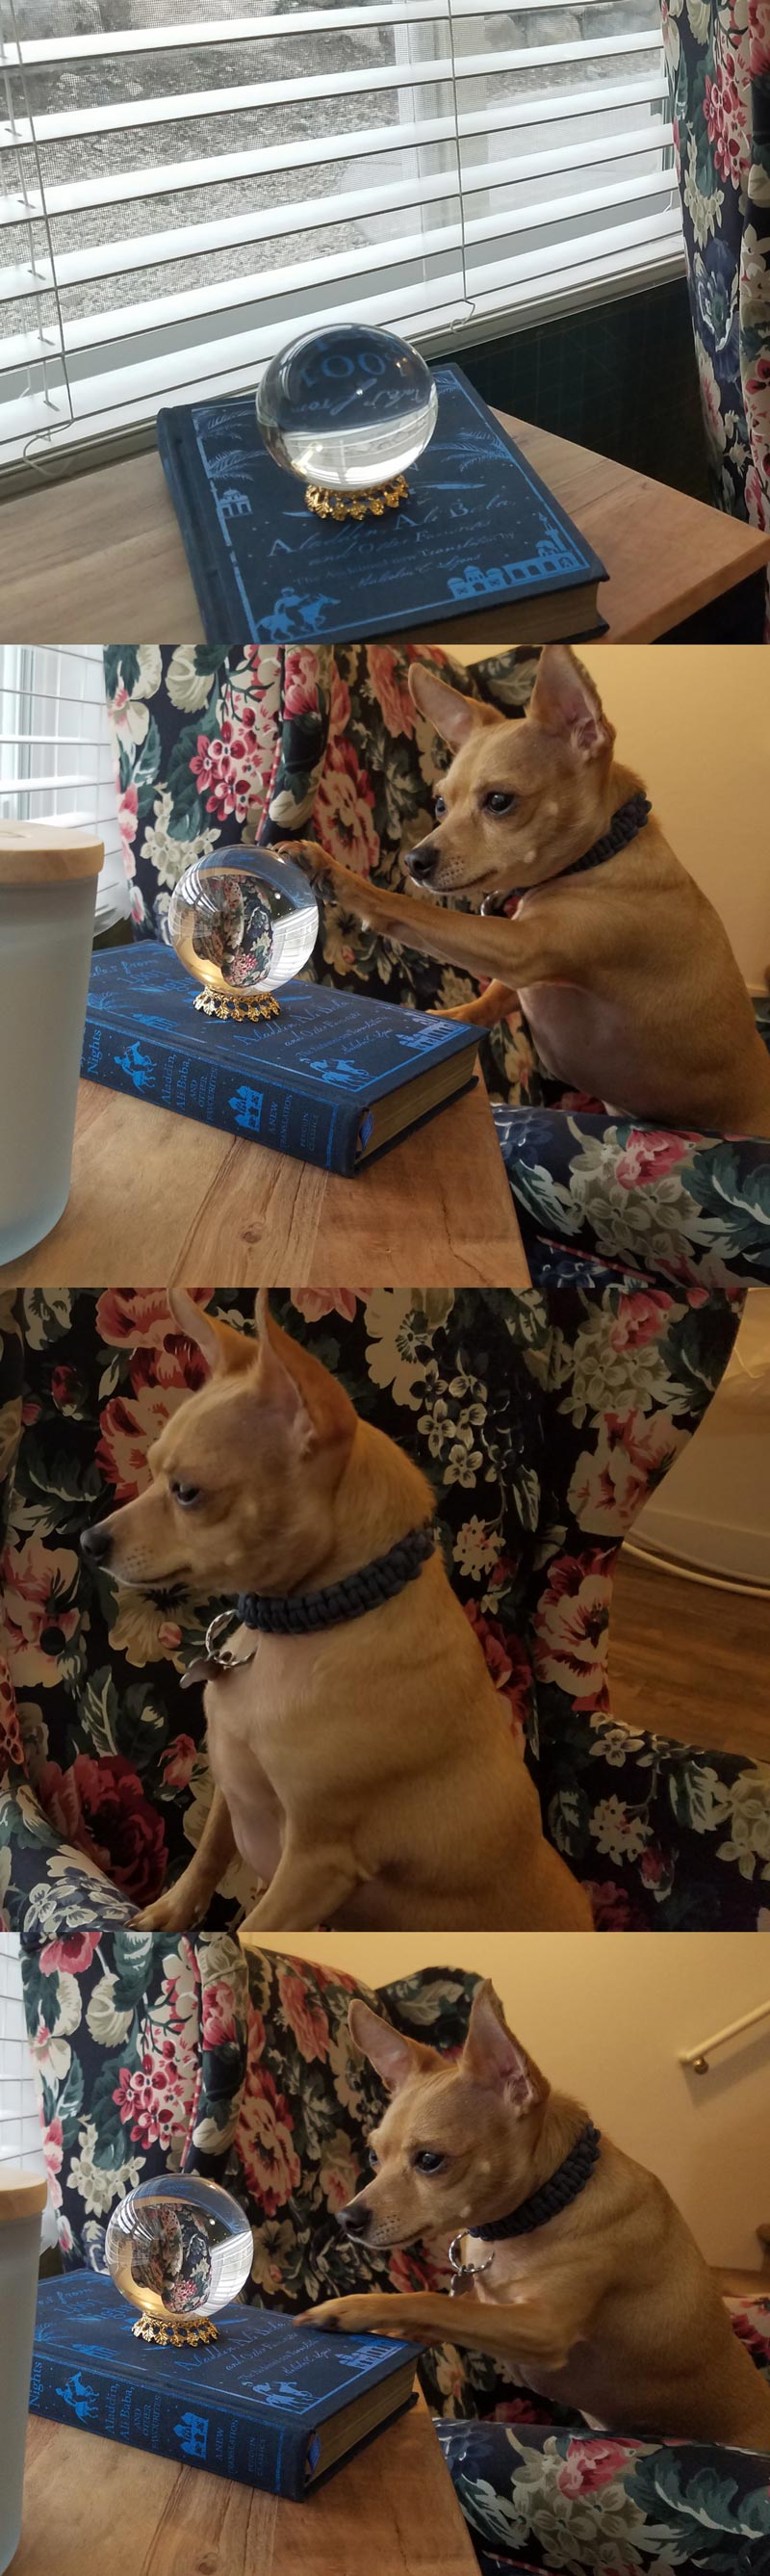 My dog can see up to the sidewalk in the reflection of my crystal ball, so he watches for people and cars but he looks like he's seeing the future